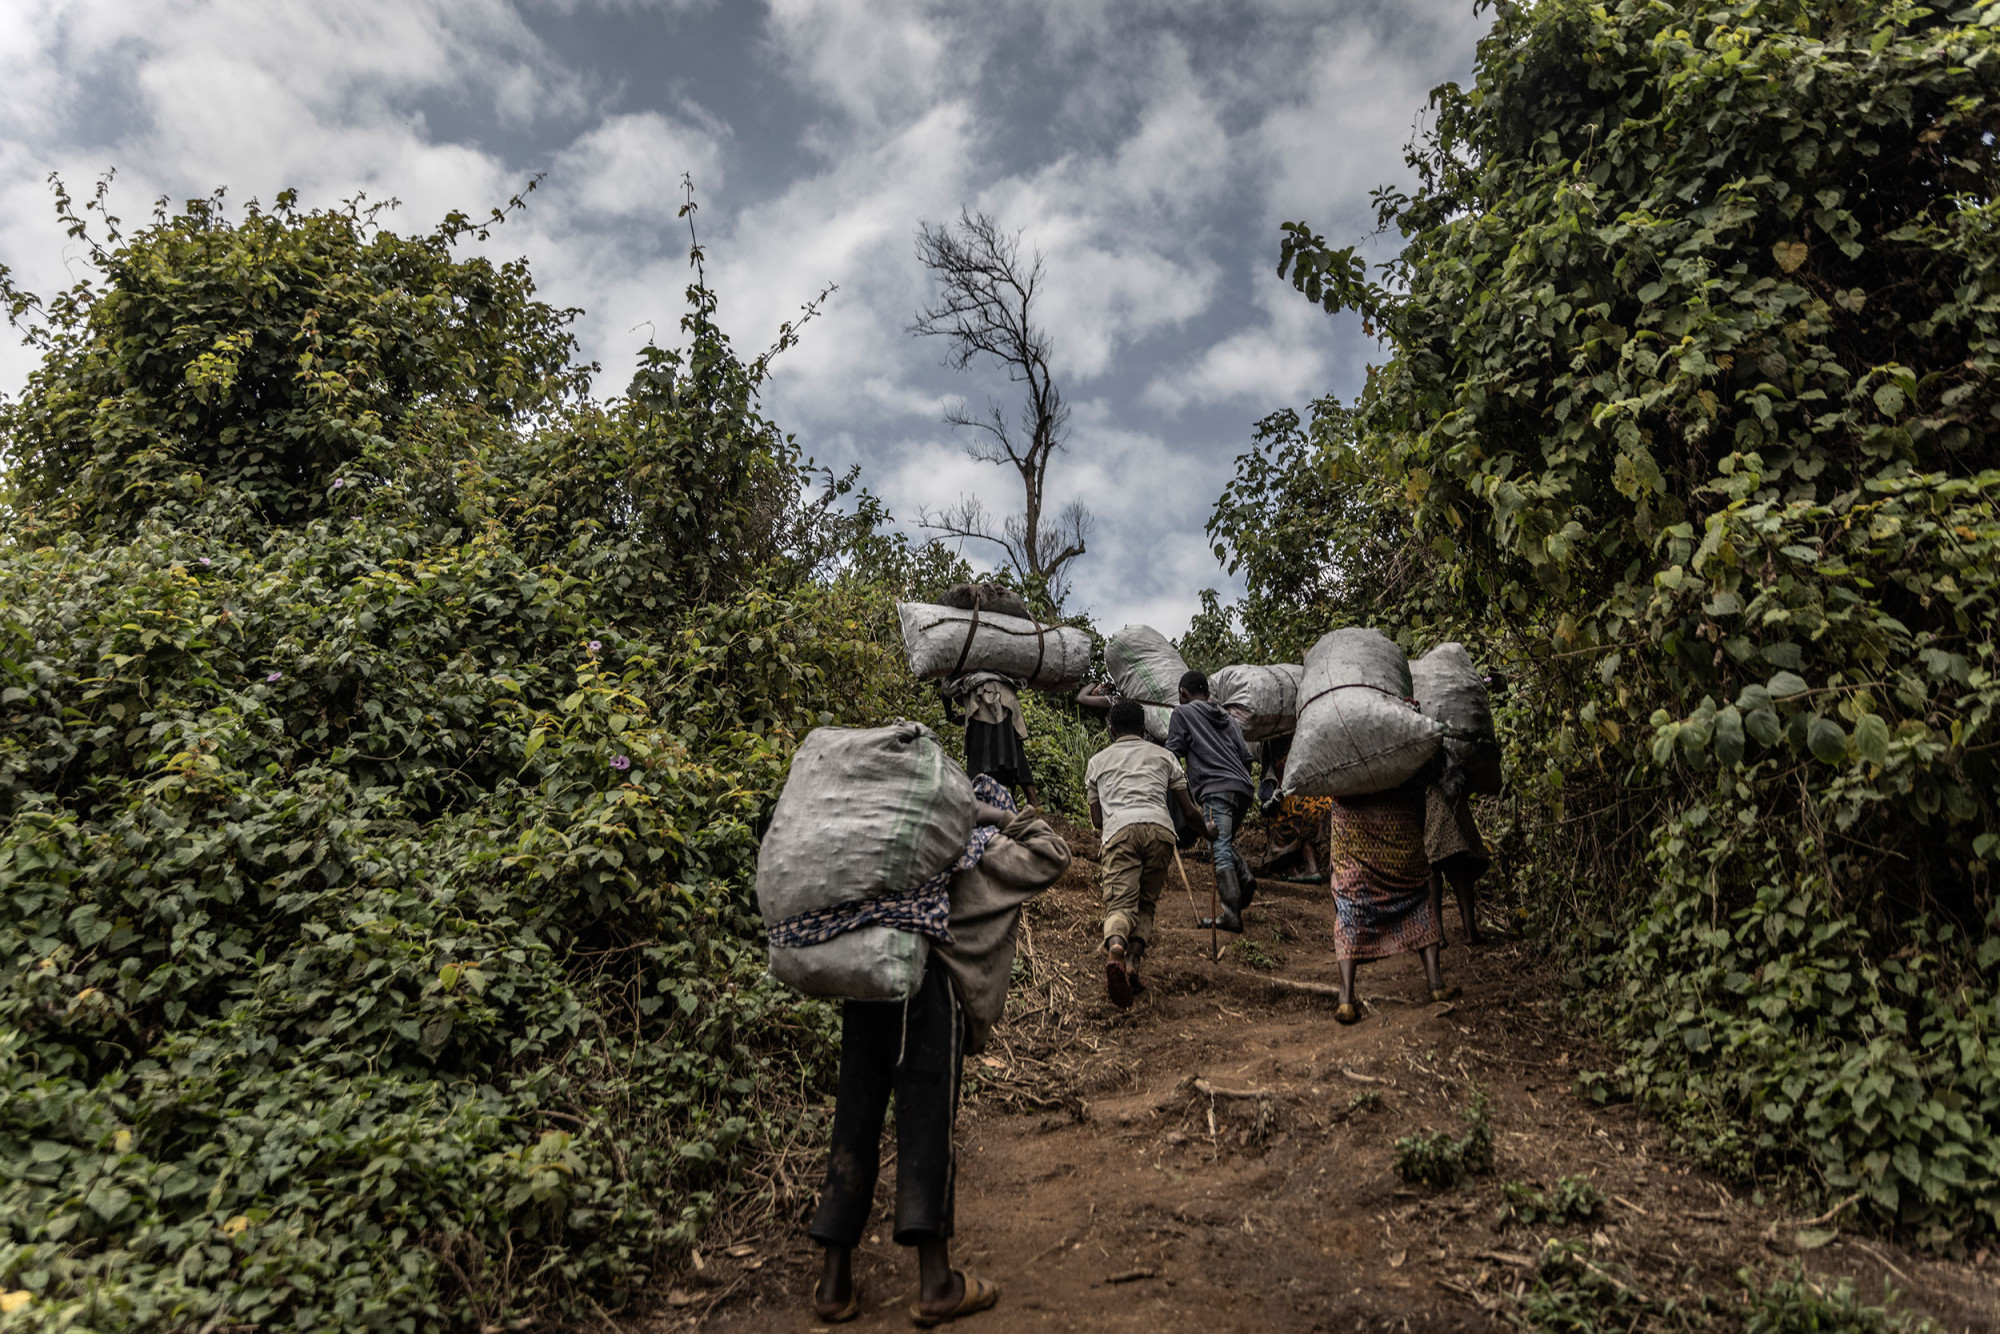 Bugamanda, Kahuzi-Biega National Park, September 03, 2021. A group of women from the Batwa community climbs a mountain with bags of charcoal to bring it back to the village for marketing. © Guerchom Ndebo for Fondation Carmignac